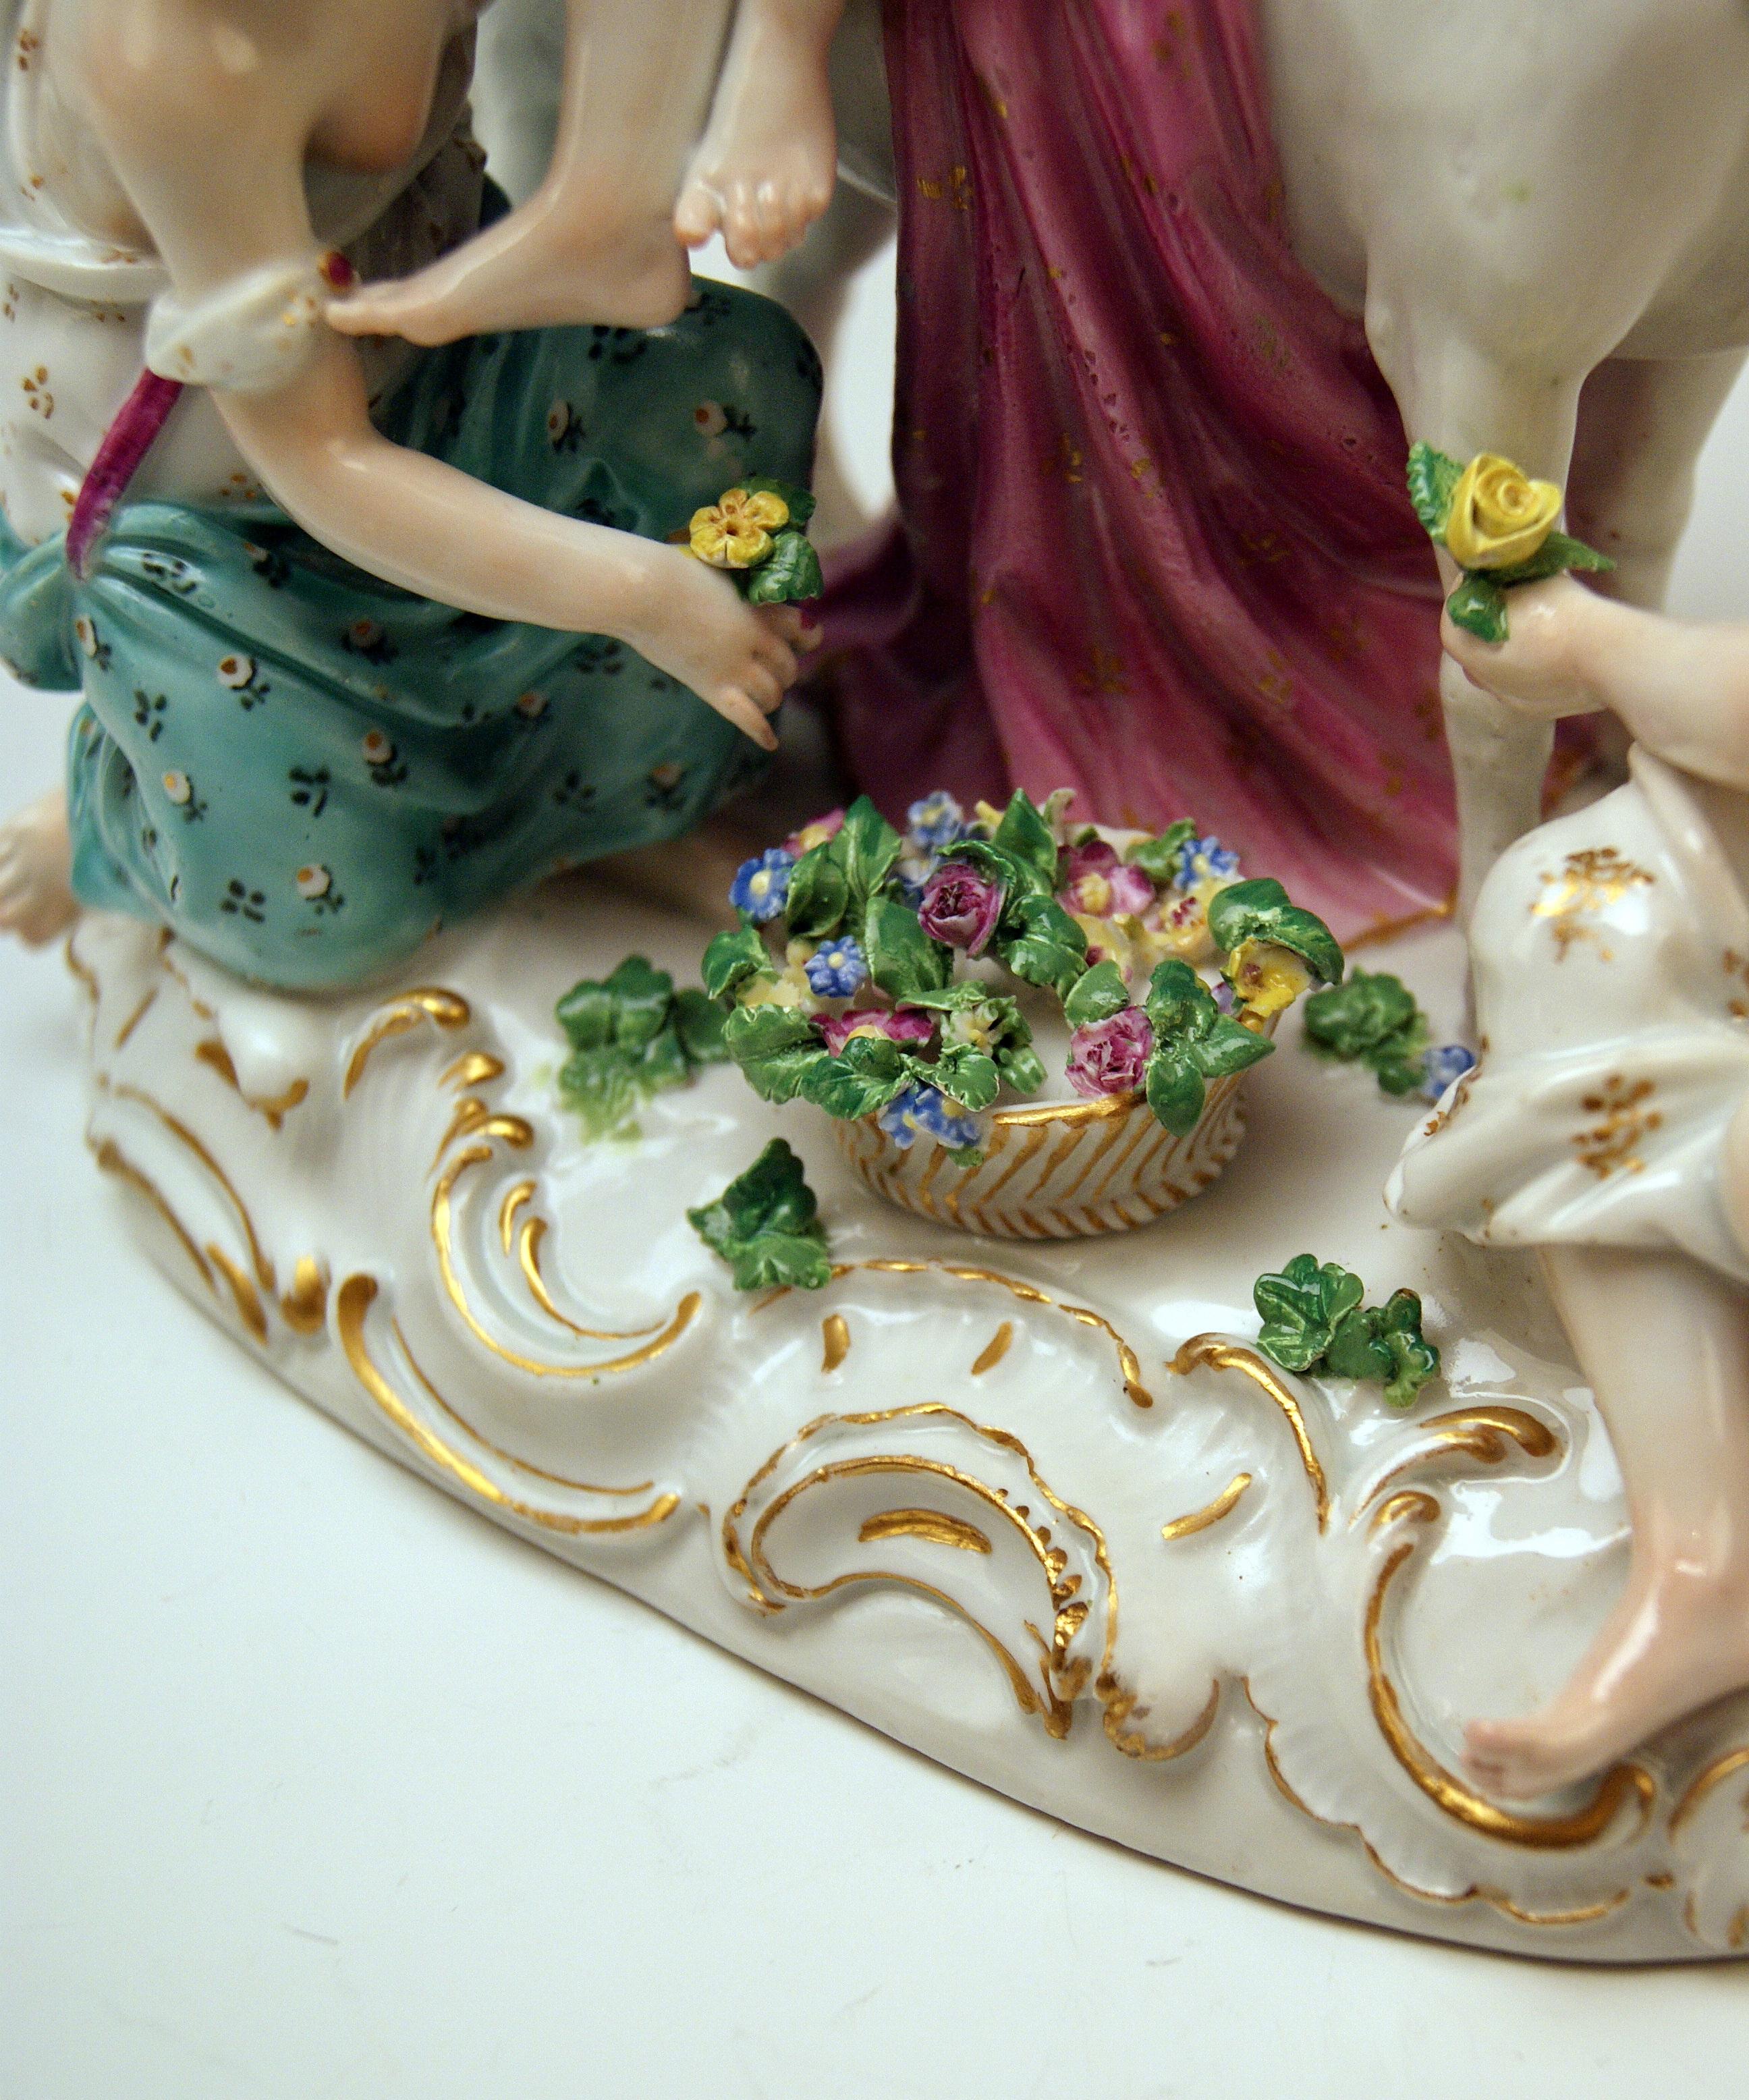 Porcelain Meissen Figurines The Rape of Europe Model 2697 by Eberlein Made c. 1750 Rococo